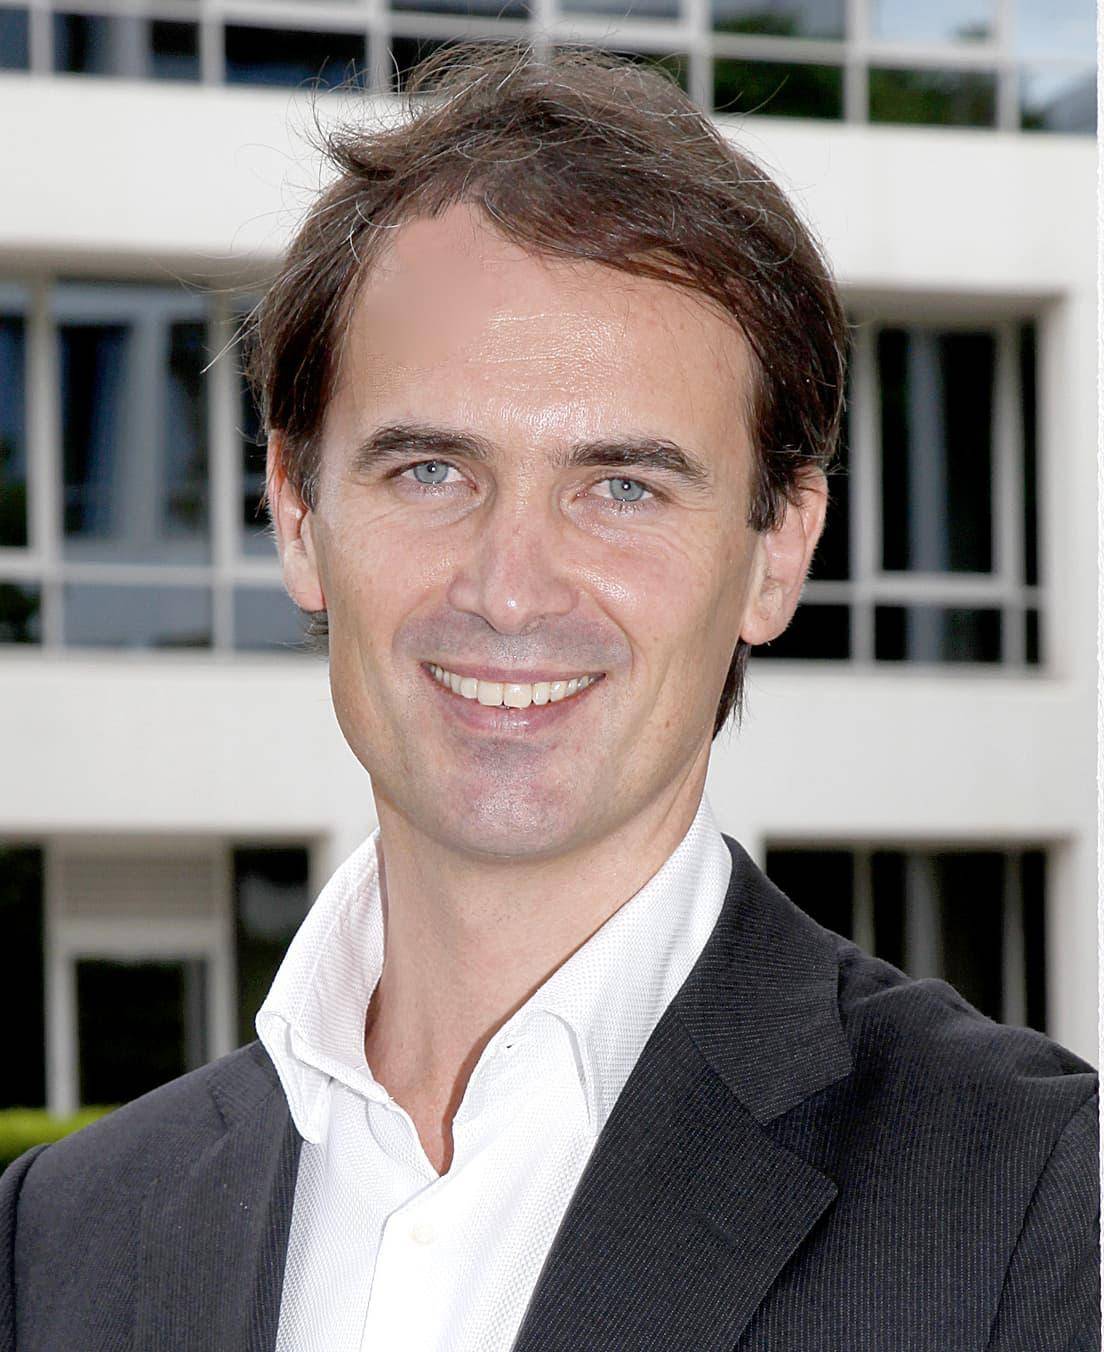 Barry Callebaut appoints Peter Boone as new Chief Innovation Officer